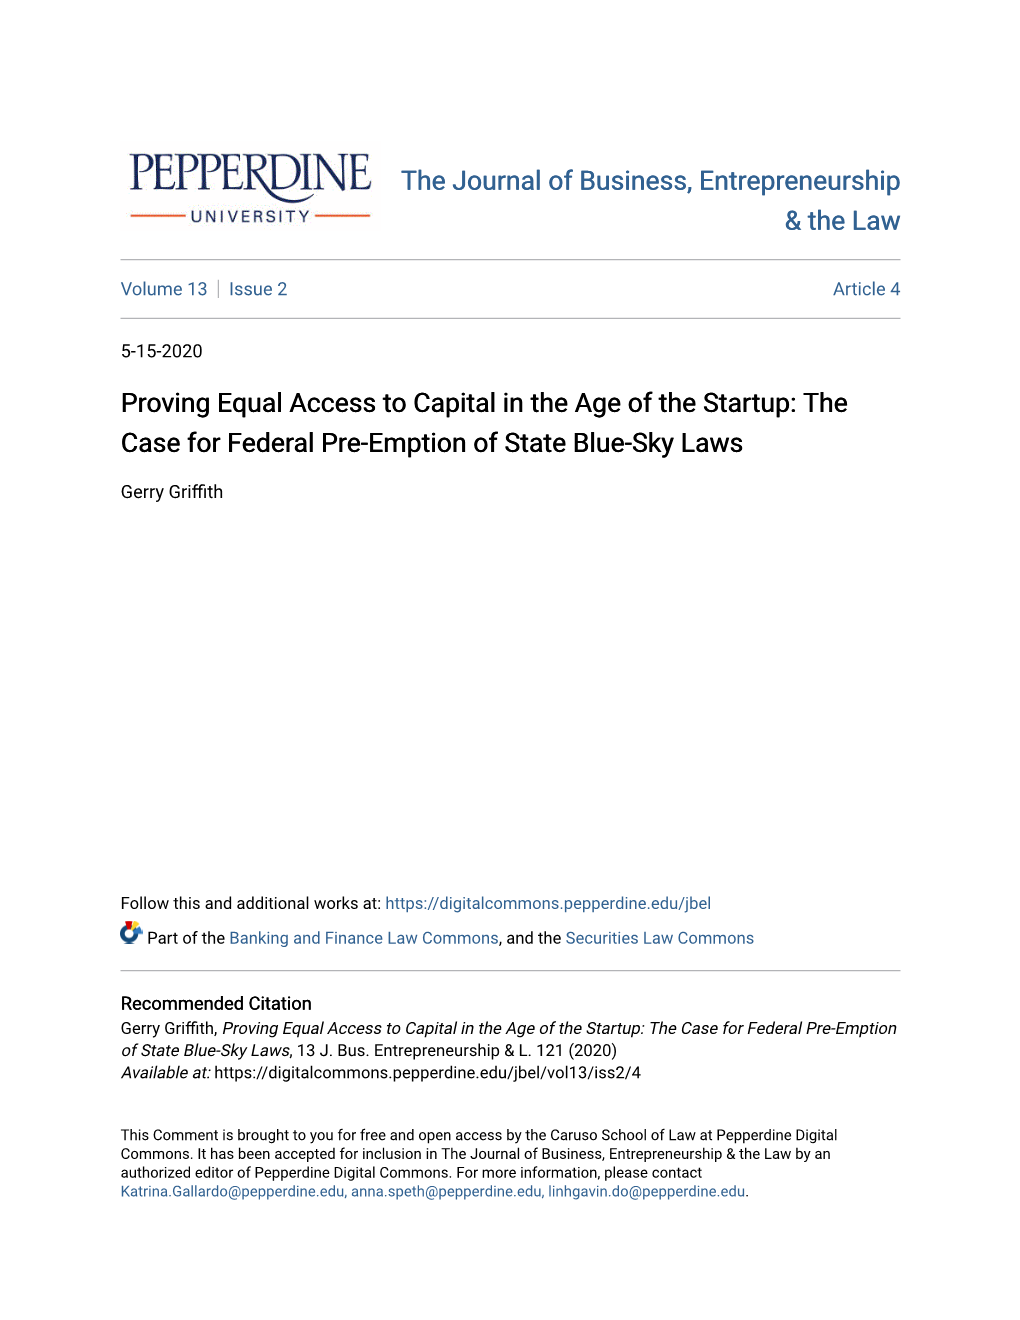 Proving Equal Access to Capital in the Age of the Startup: the Case for Federal Pre-Emption of State Blue-Sky Laws